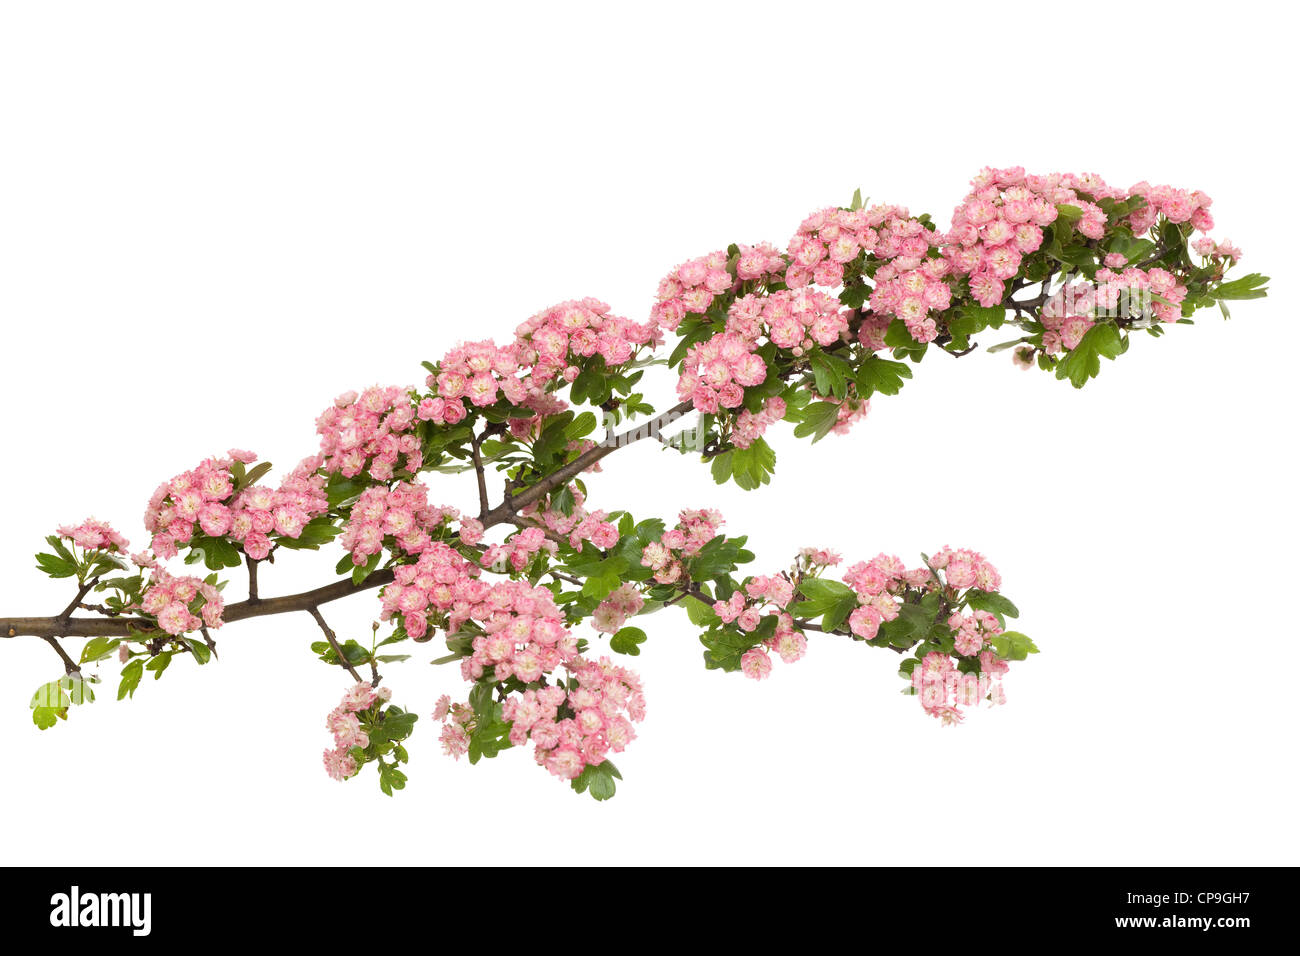 decoration hawthorn in bloom with red flower heads Stock Photo